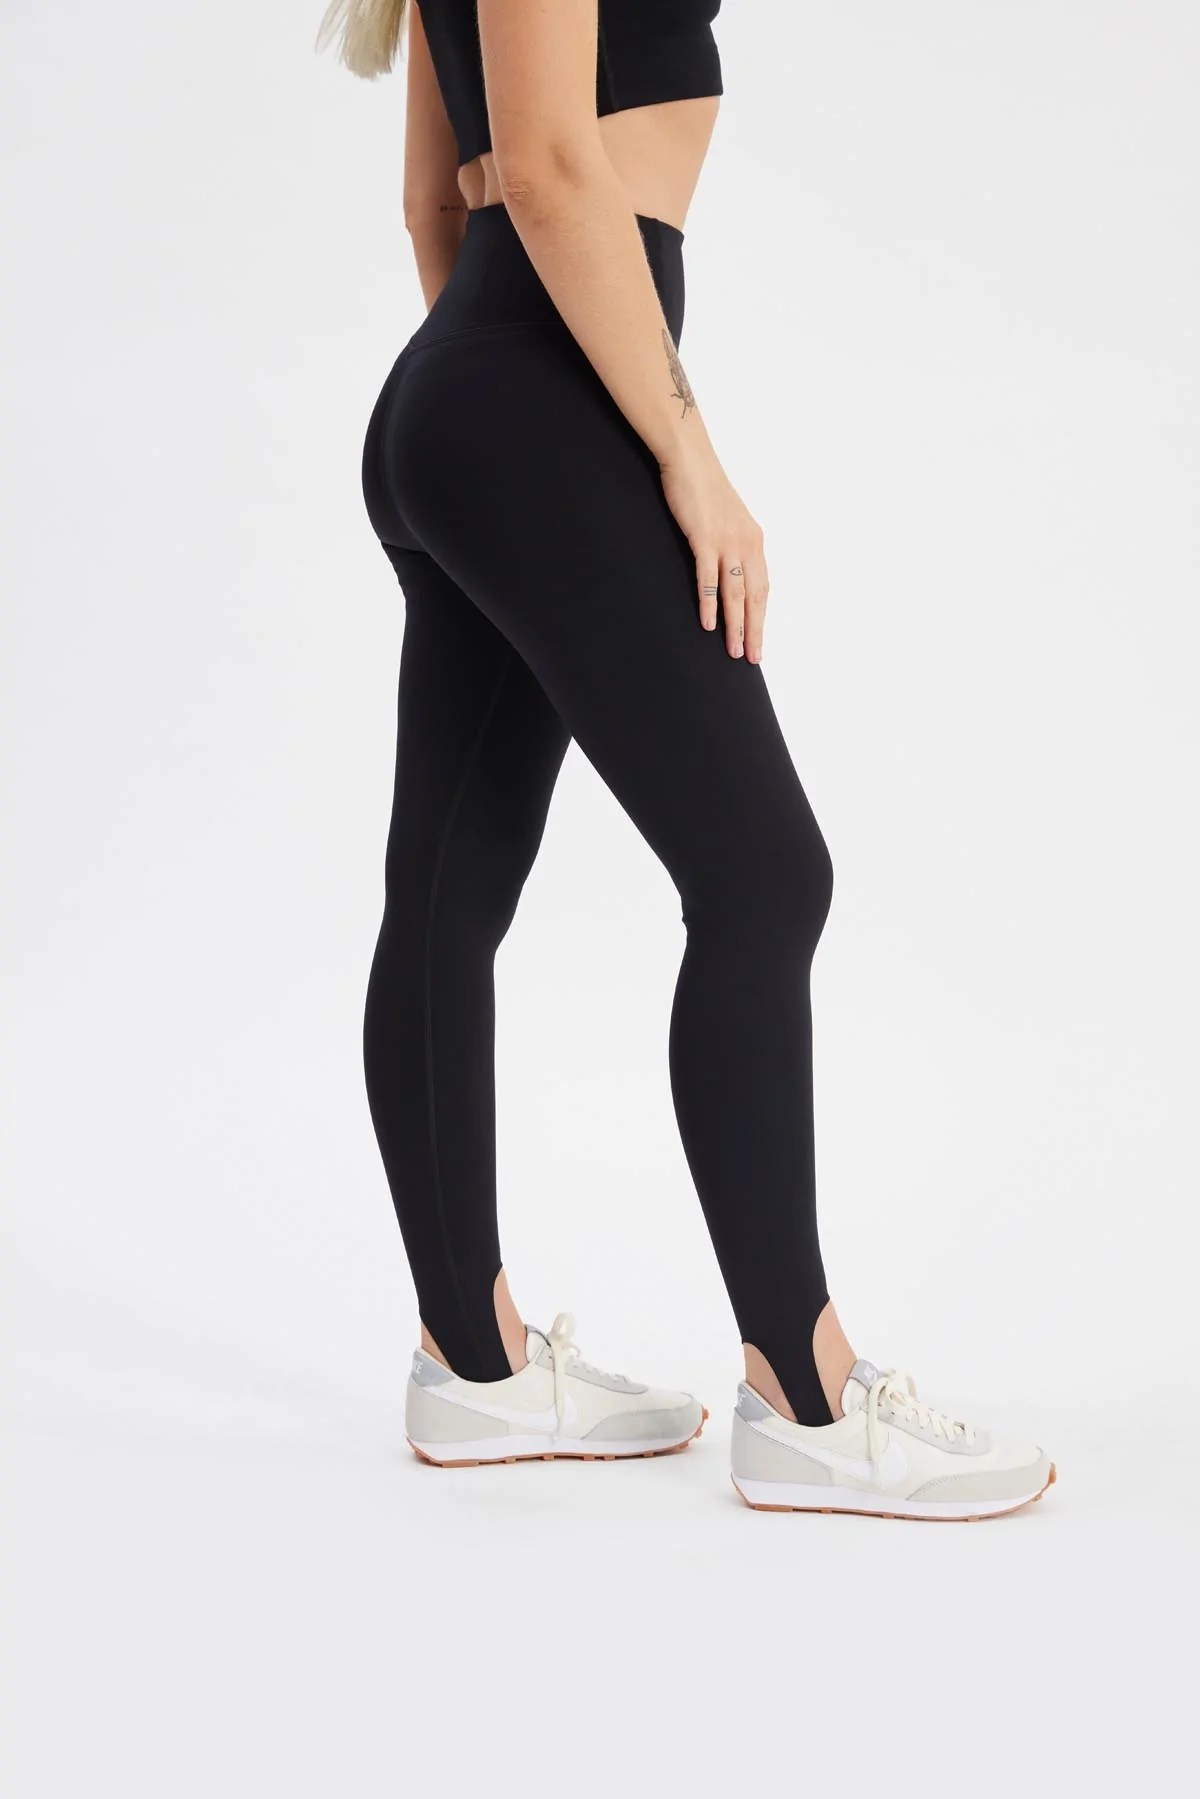 Upgrade Your Basic Black Leggings With Carbon38's New In-House